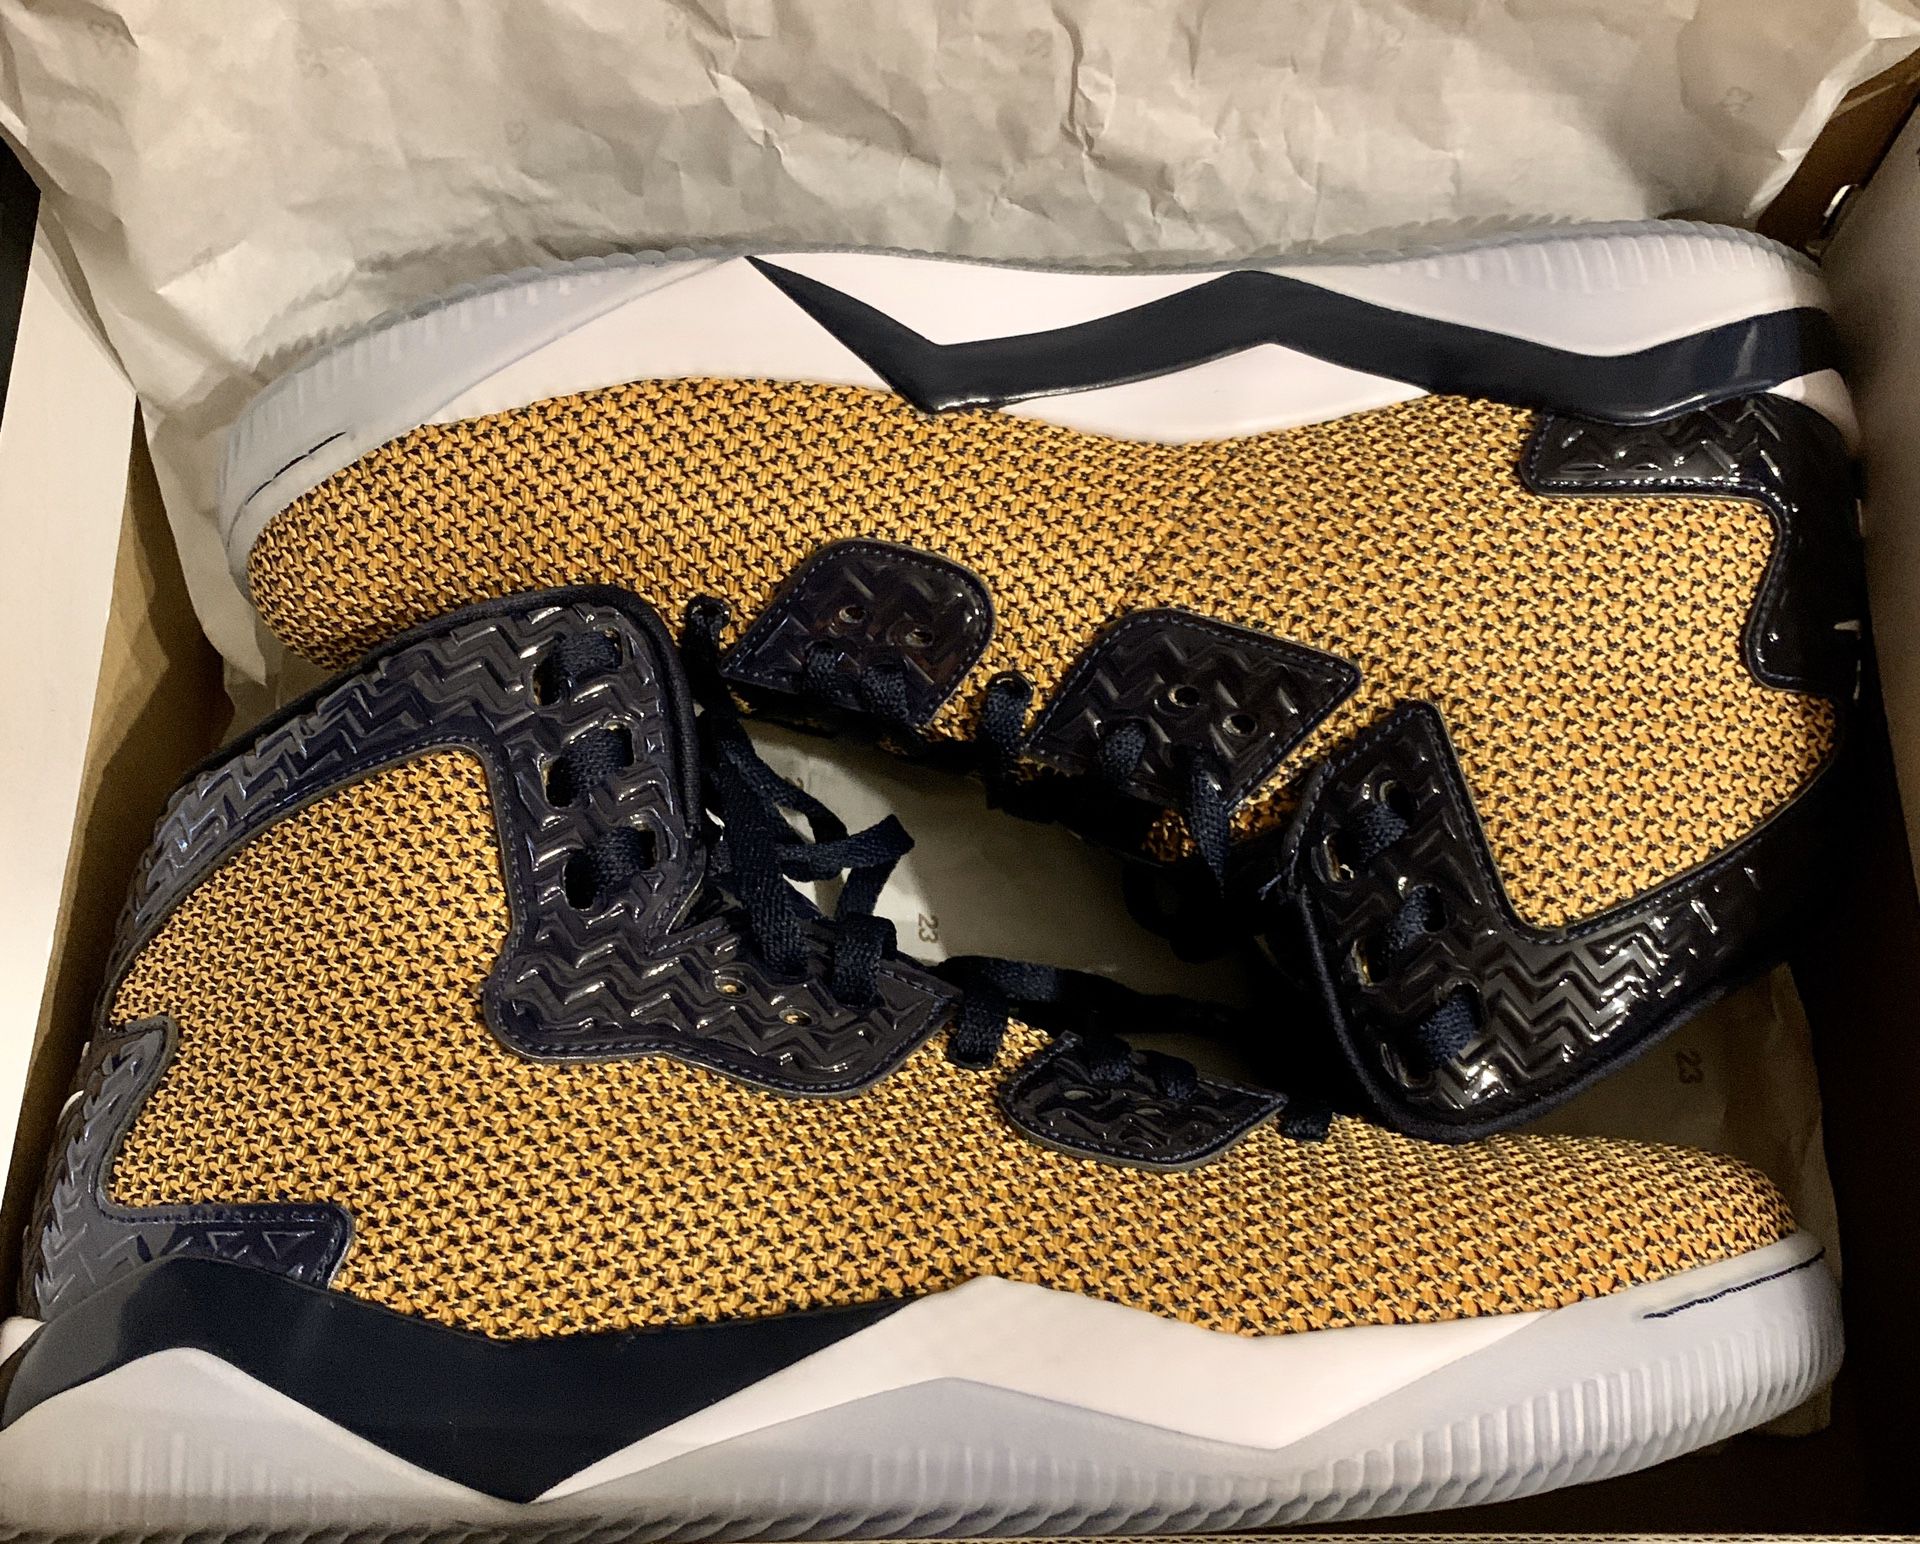 BRAND NEW, never worn, size 14 men’s shoes. STYLE - 819952-706 COLORWAY - GOLD LEAF/WHITE-MIDNIGHT NAVY RETAIL PRICE - paid $180 new, Collector addi